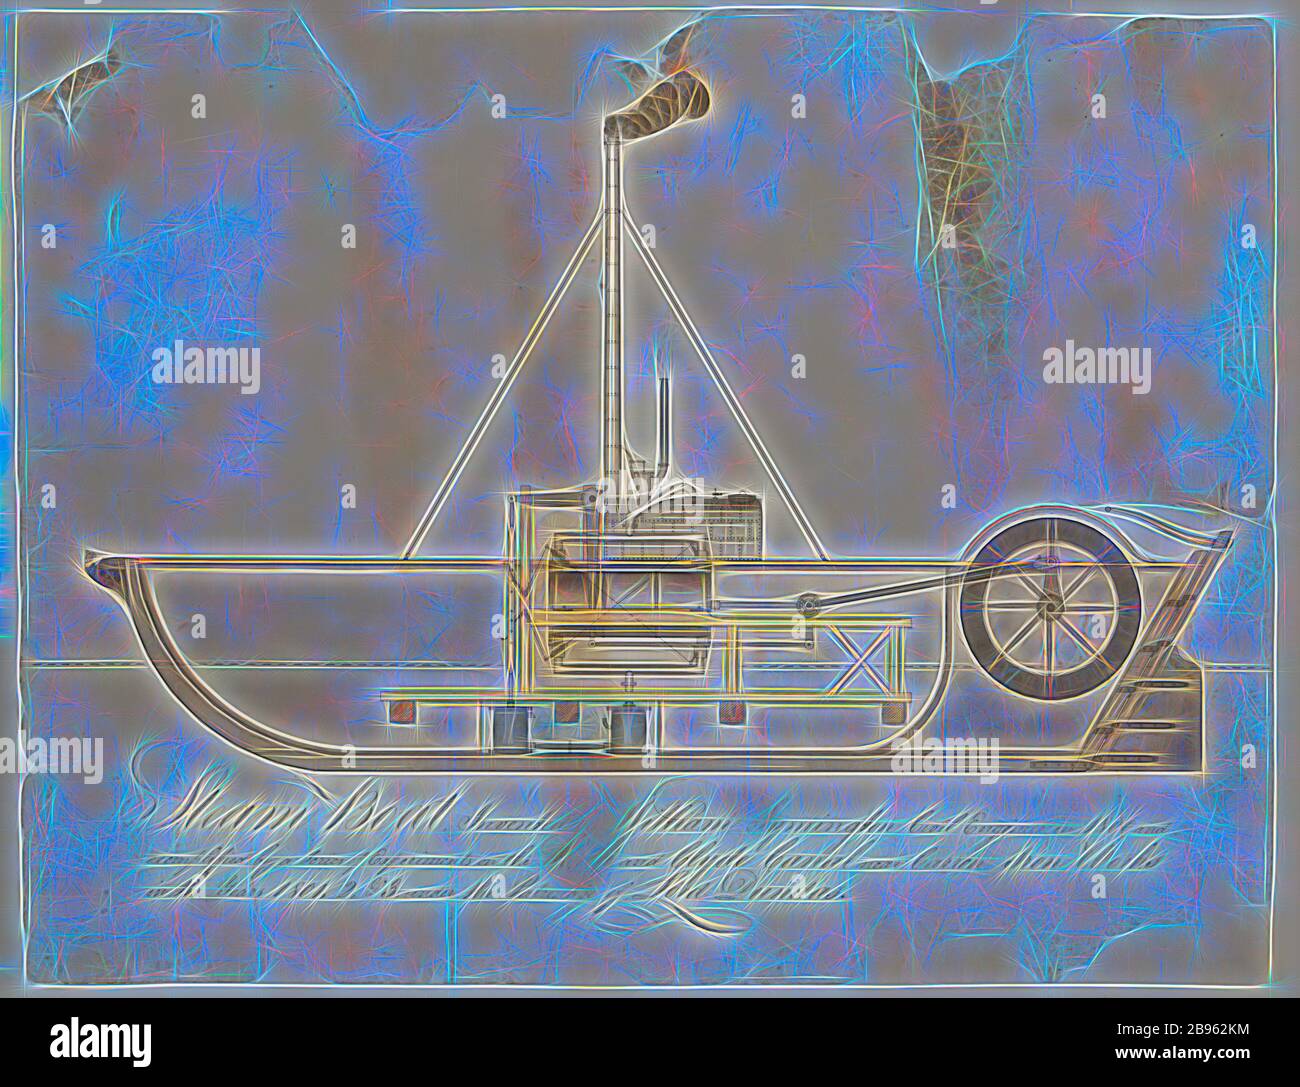 Engineering Drawing - William Symington, 'Charlotte Dundas', Steam Boat Invented for Lord Dundas, 1801-1803, Ink and water-colour technical drawing showing a longitudinal cross-sectional elevation of the fourth and final experimental paddlesteamer built under the direction of the Scottish engineer and inventor, William Symington, C.E.. The vessel depicted is the second of two steam-powered paddleboats designed by Symington for the Forth and Clyde Navigation Company at the instigation of Lord Dundas (Sir, Reimagined by Gibon, design of warm cheerful glowing of brightness and light rays radiance Stock Photo